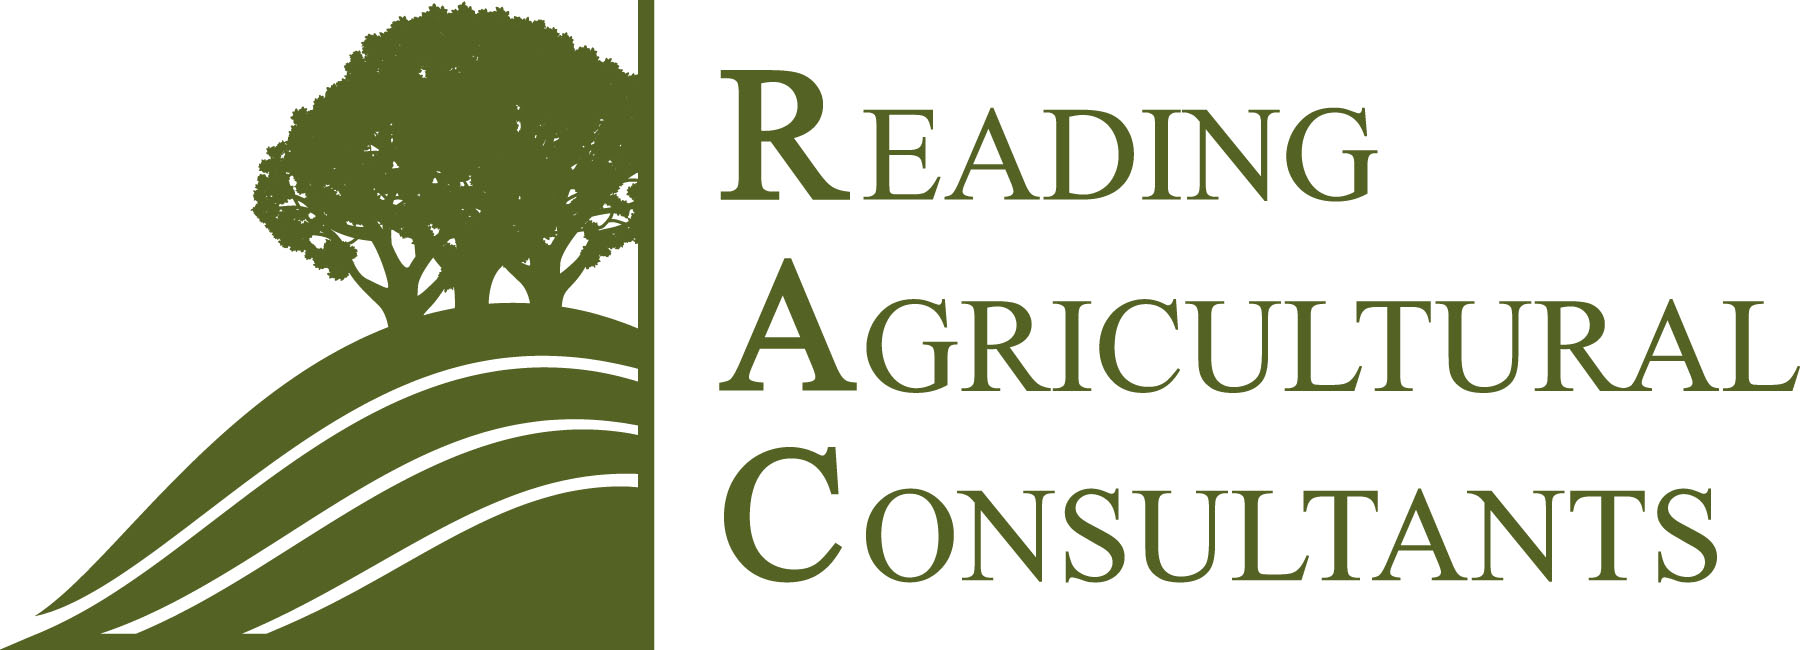 Reading Agricultural Consultants Ltd logo